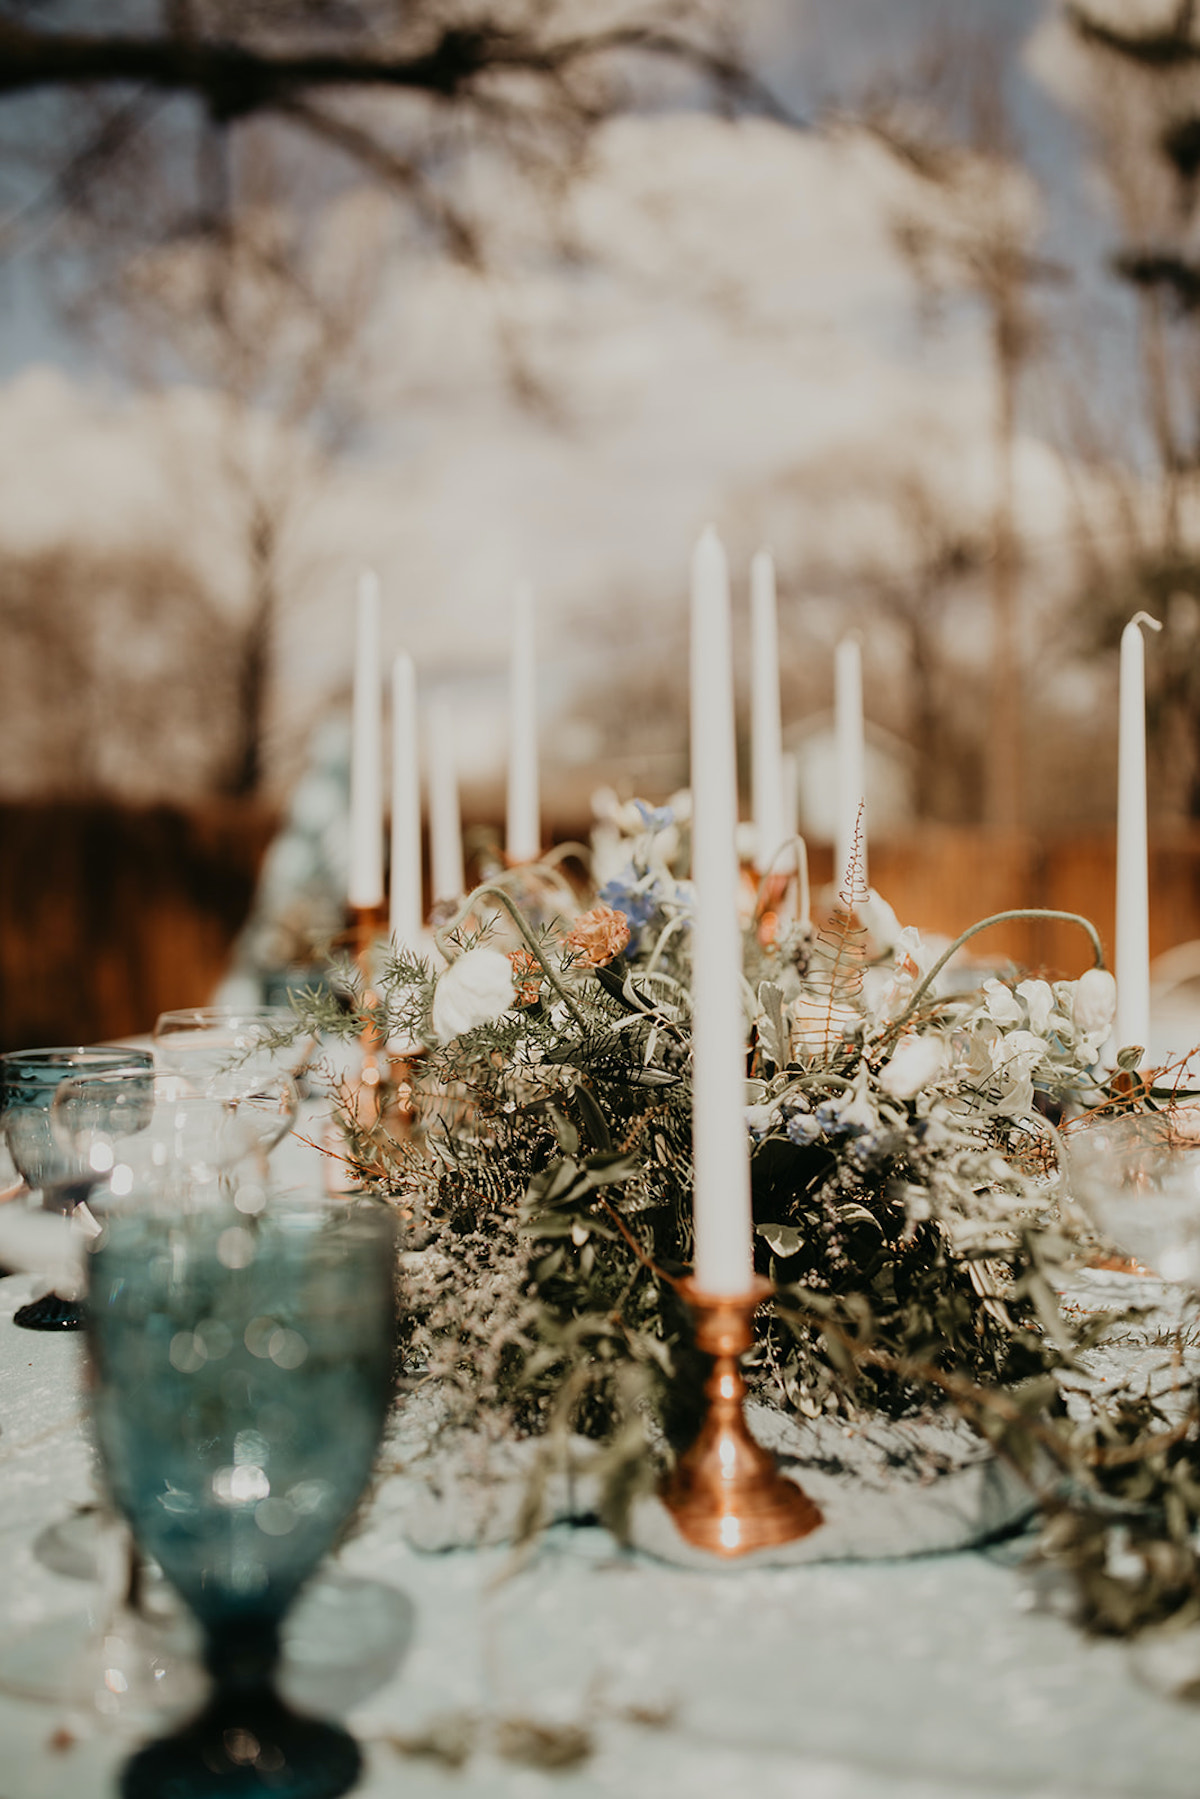 Vintage-inspired wedding floral running with vintage candle holders